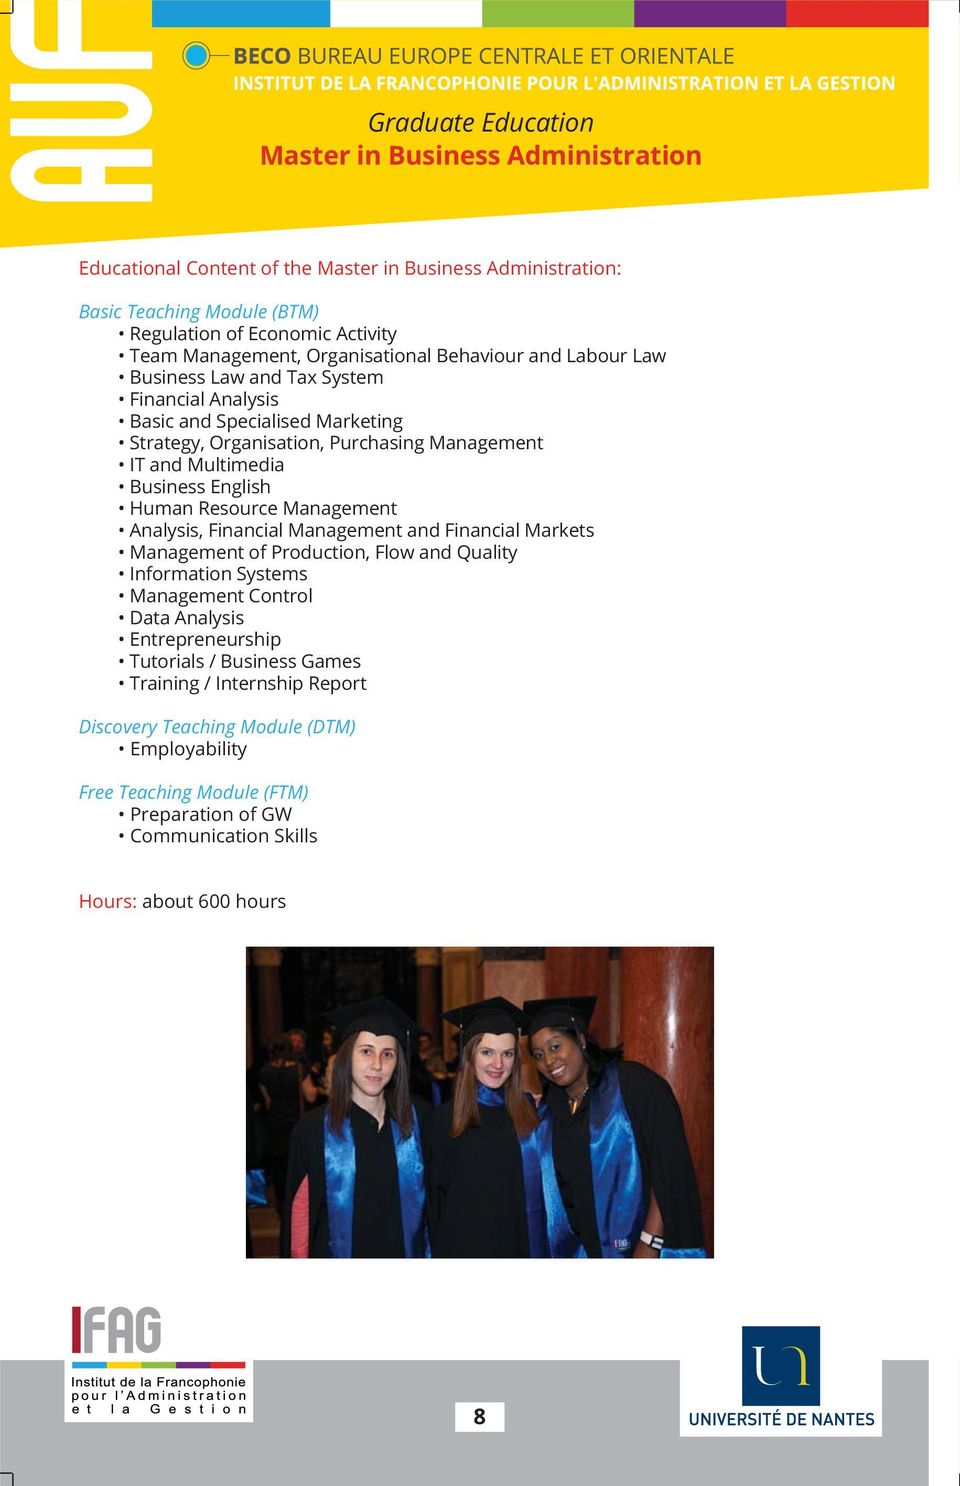 English Human Resource Management Analysis, Financial Management and Financial Markets Management of Production, Flow and Quality Information Systems Management Control Data Analysis